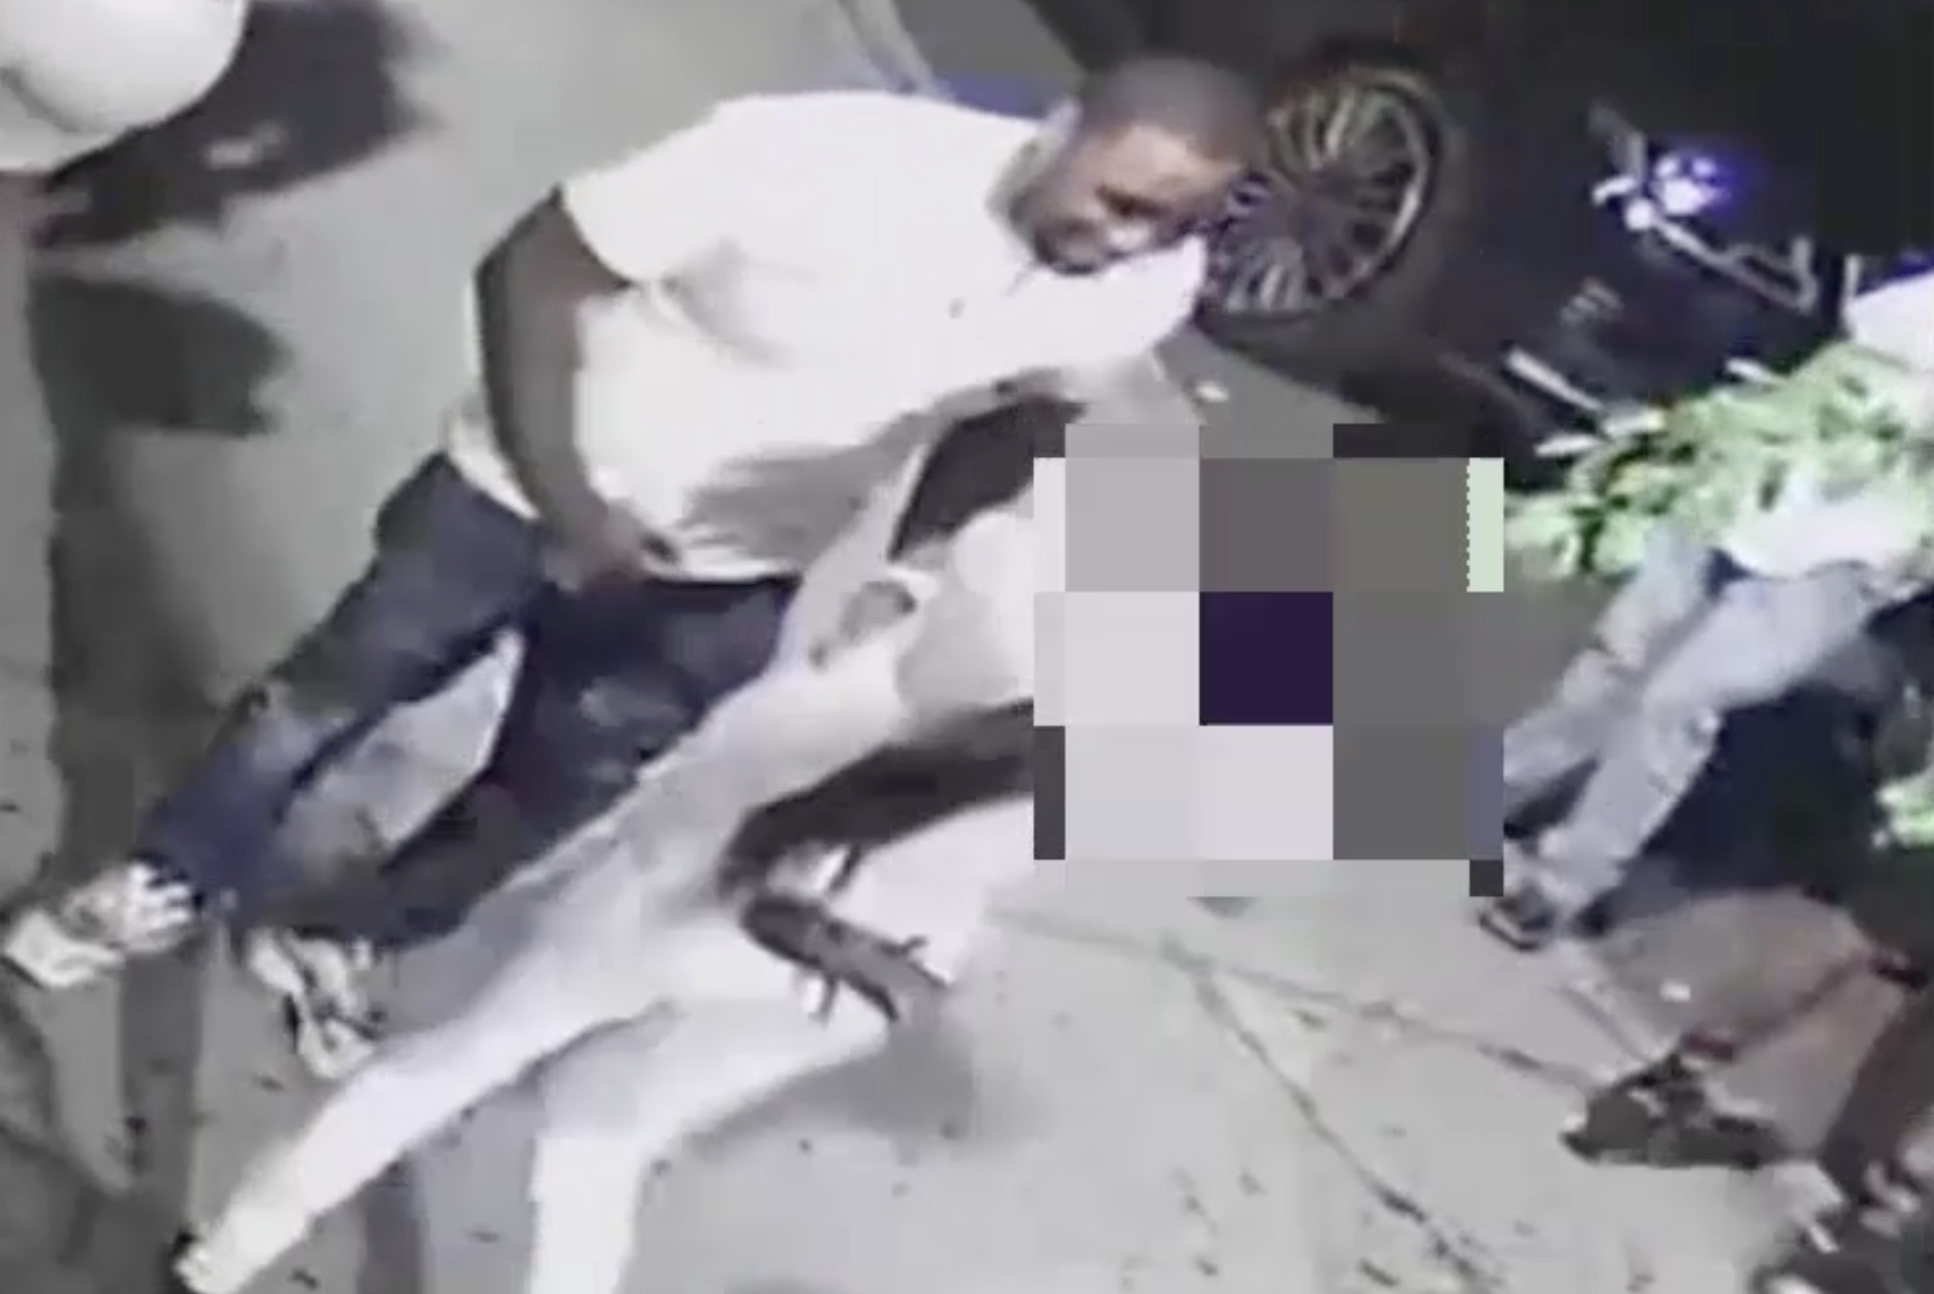 Man sought in Astoria strip club shooting that wounded two NYPD